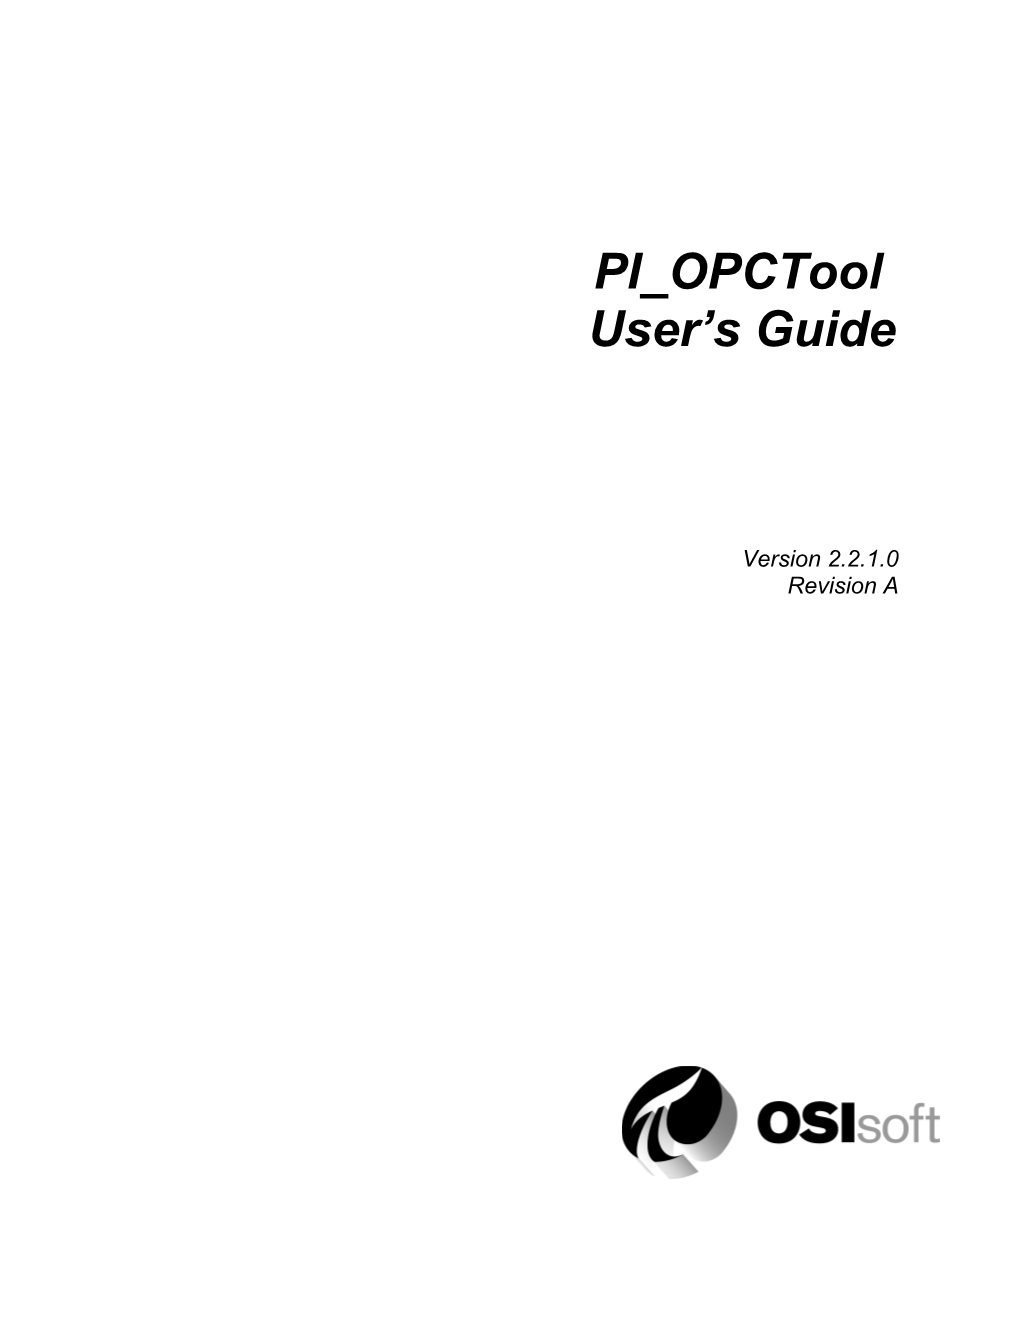 PI Opctool User Guide